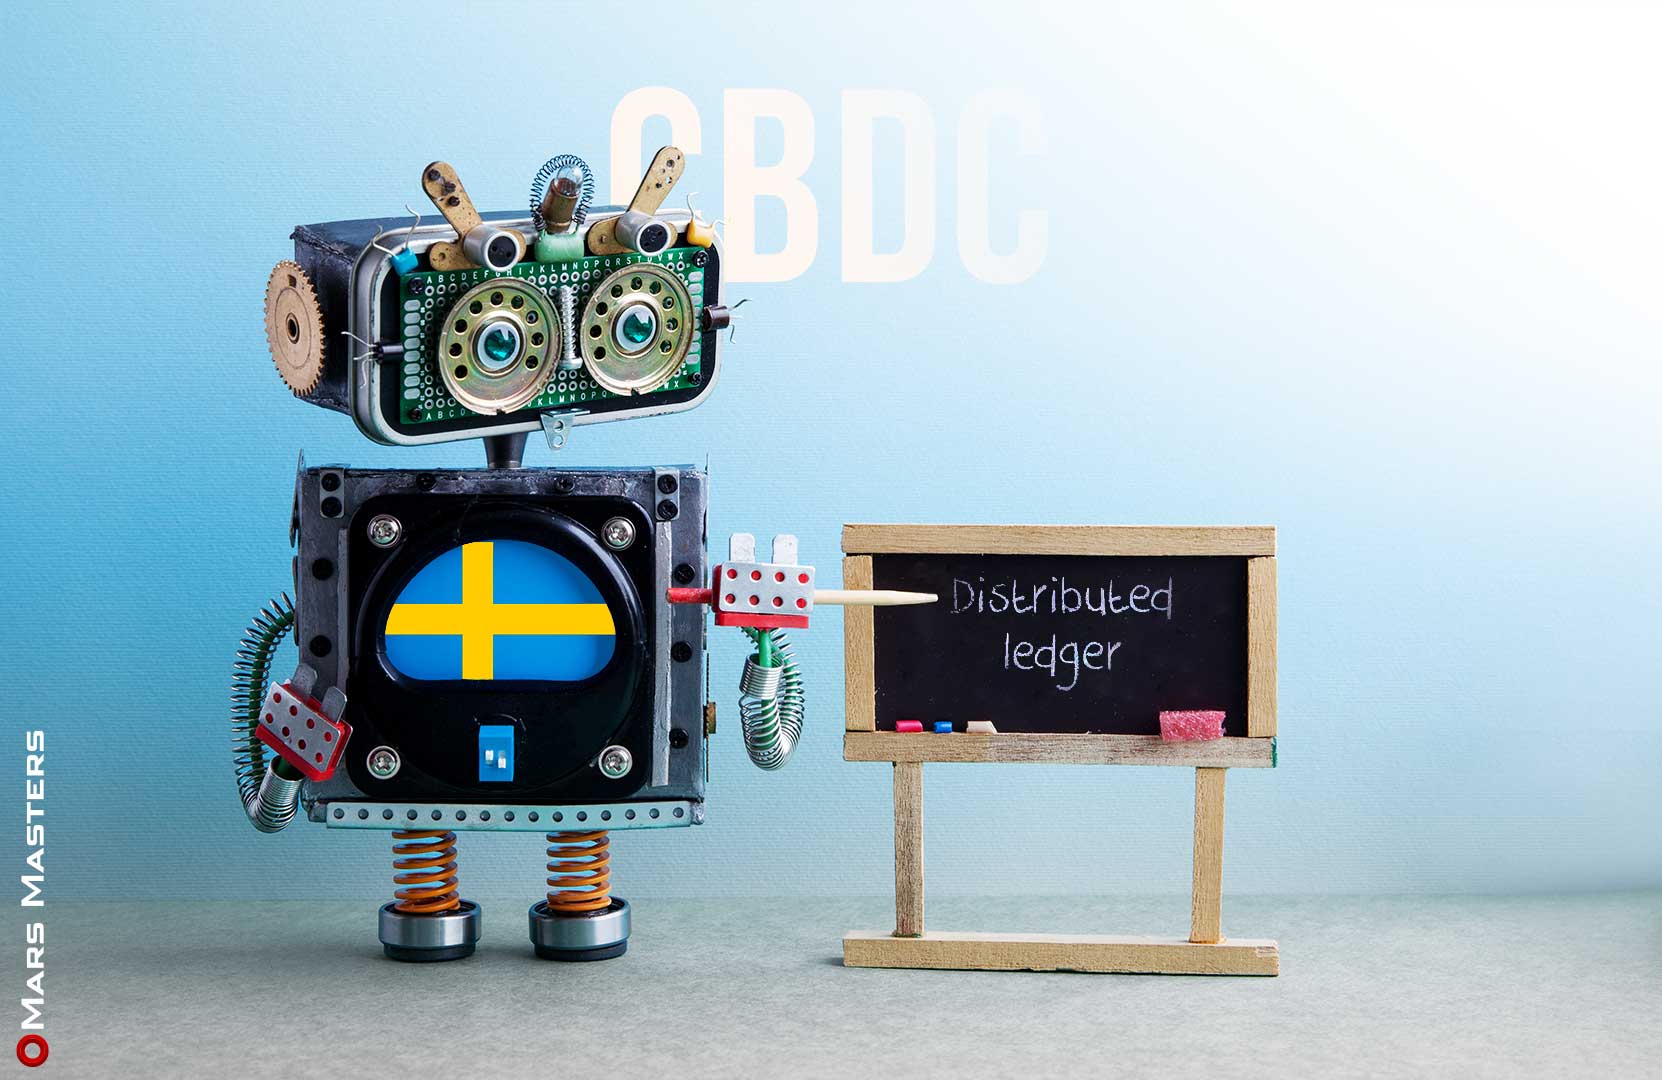 Sweden is working with DLT for its CBDC proof-of-concept